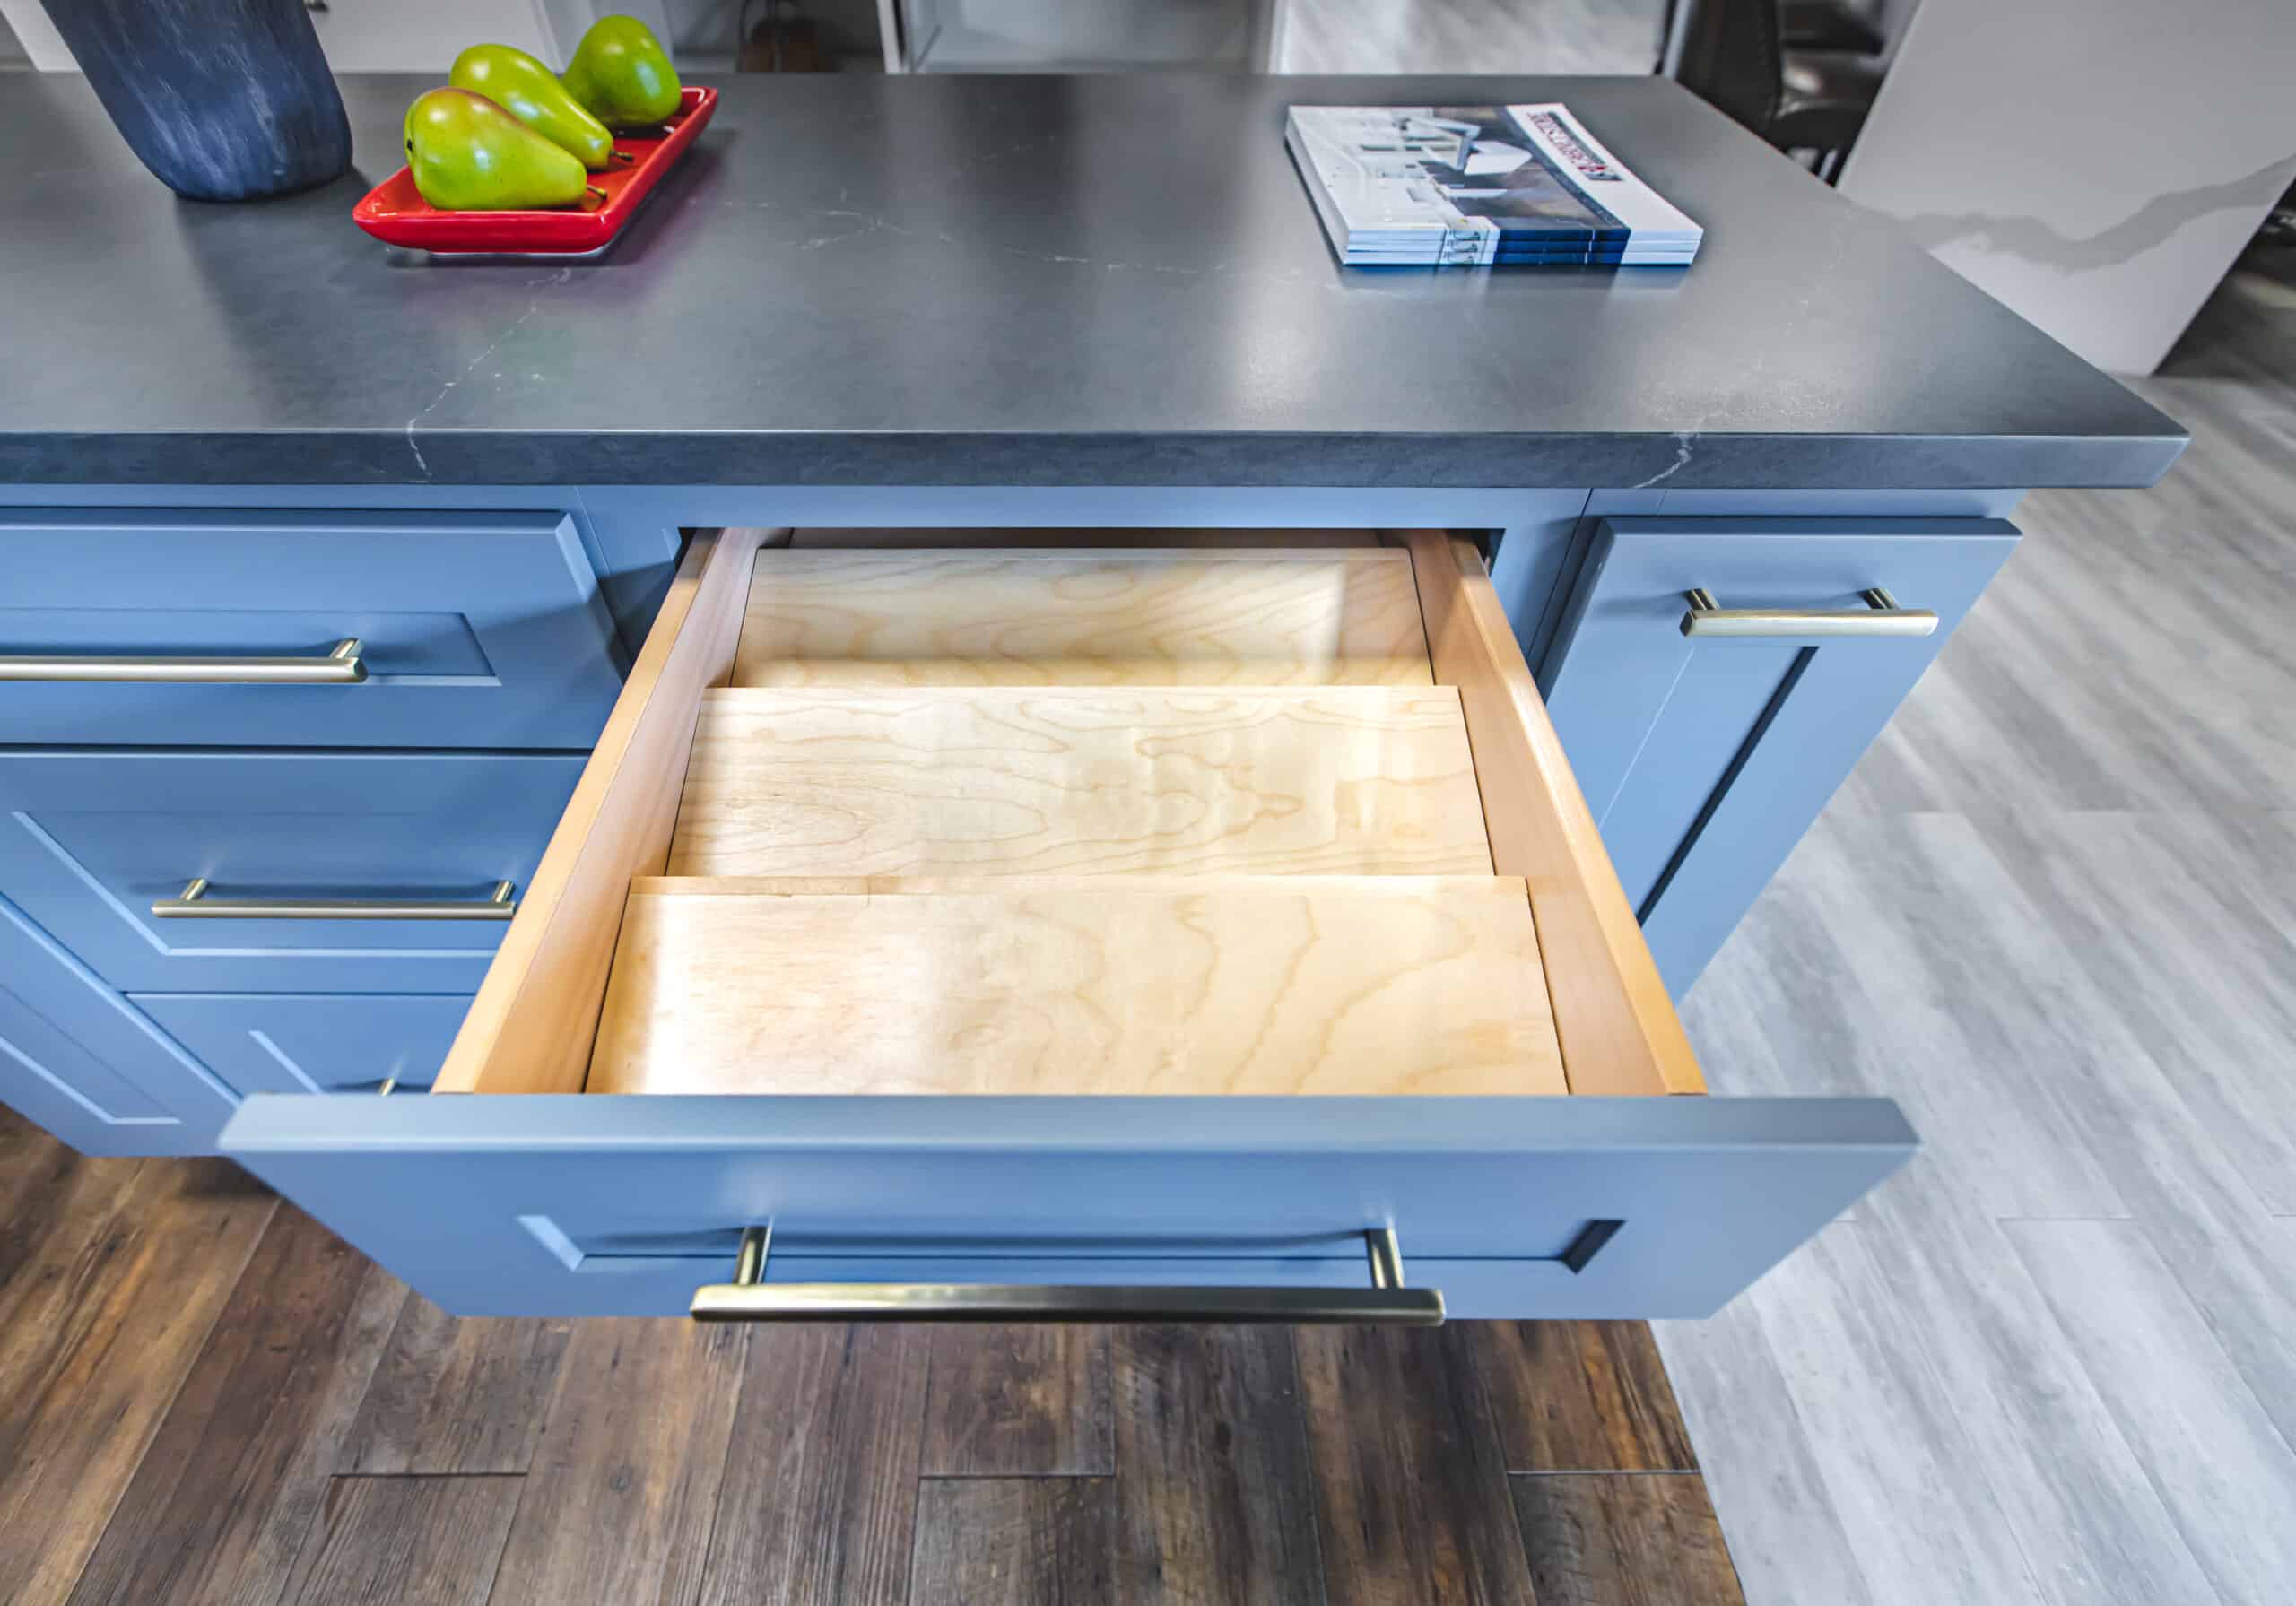 A kitchen island with drawers and a fruit